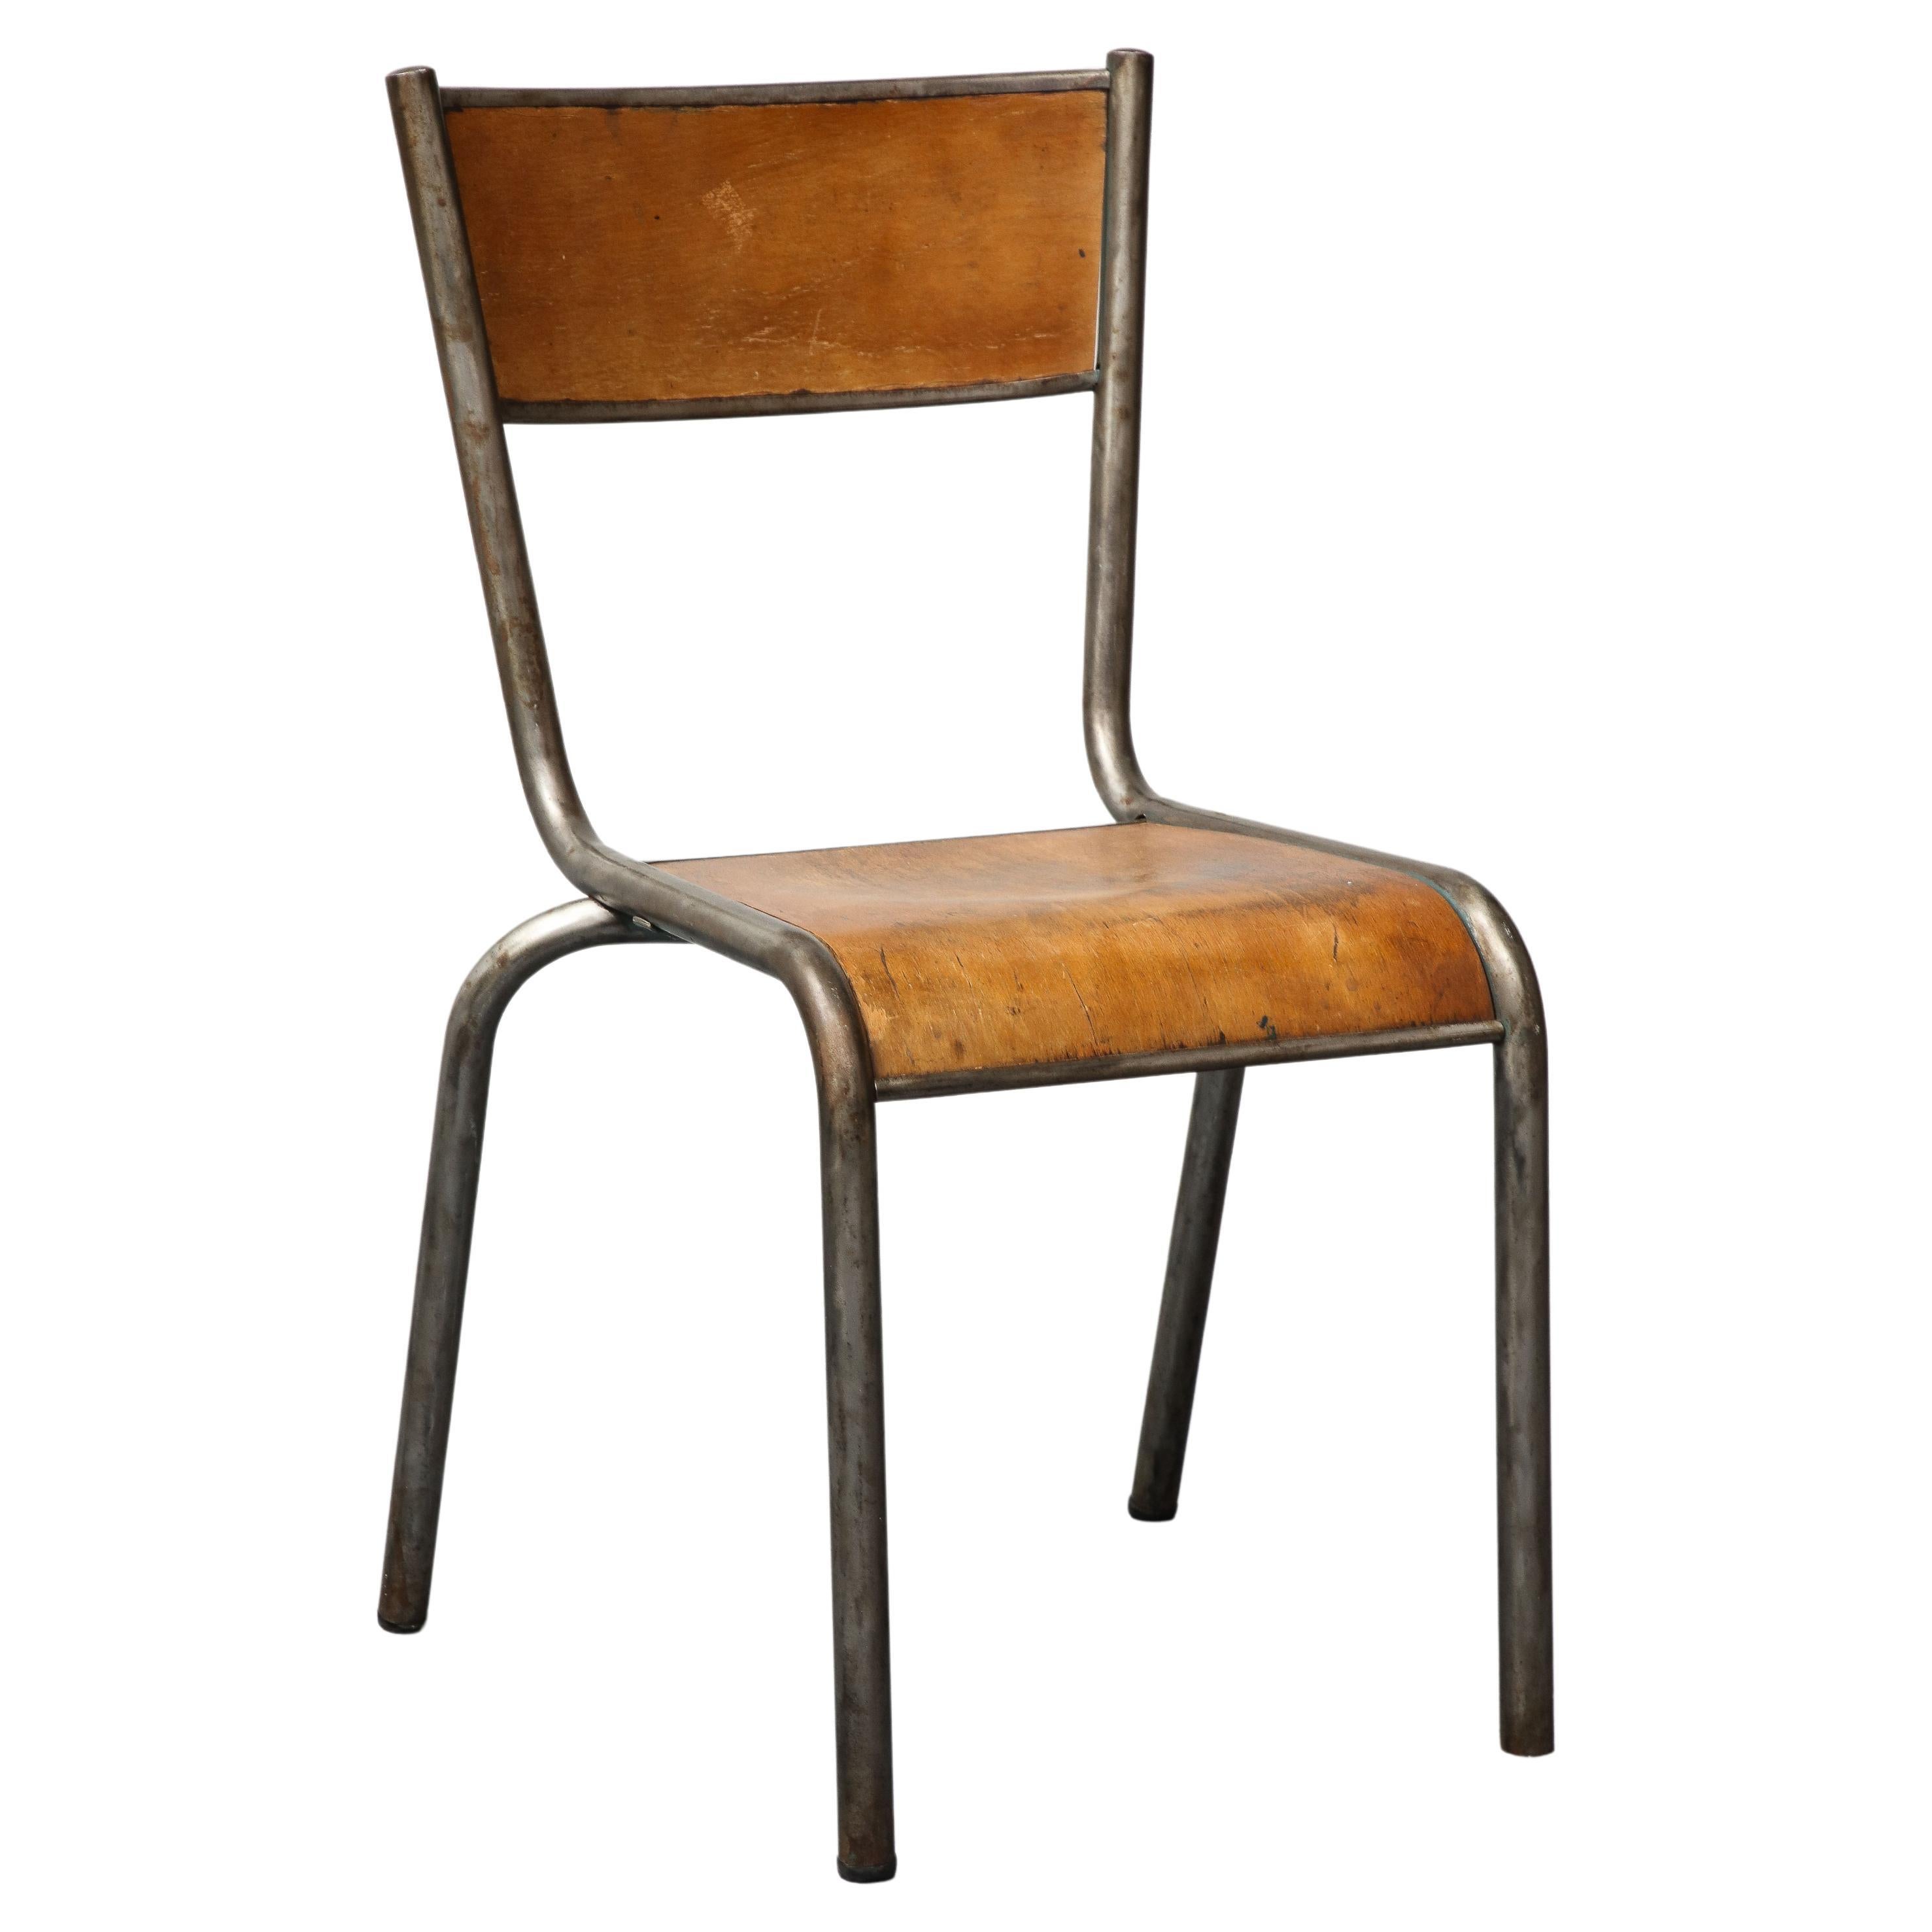 Polished Steel and Bentwood Chair, France, c. 1940